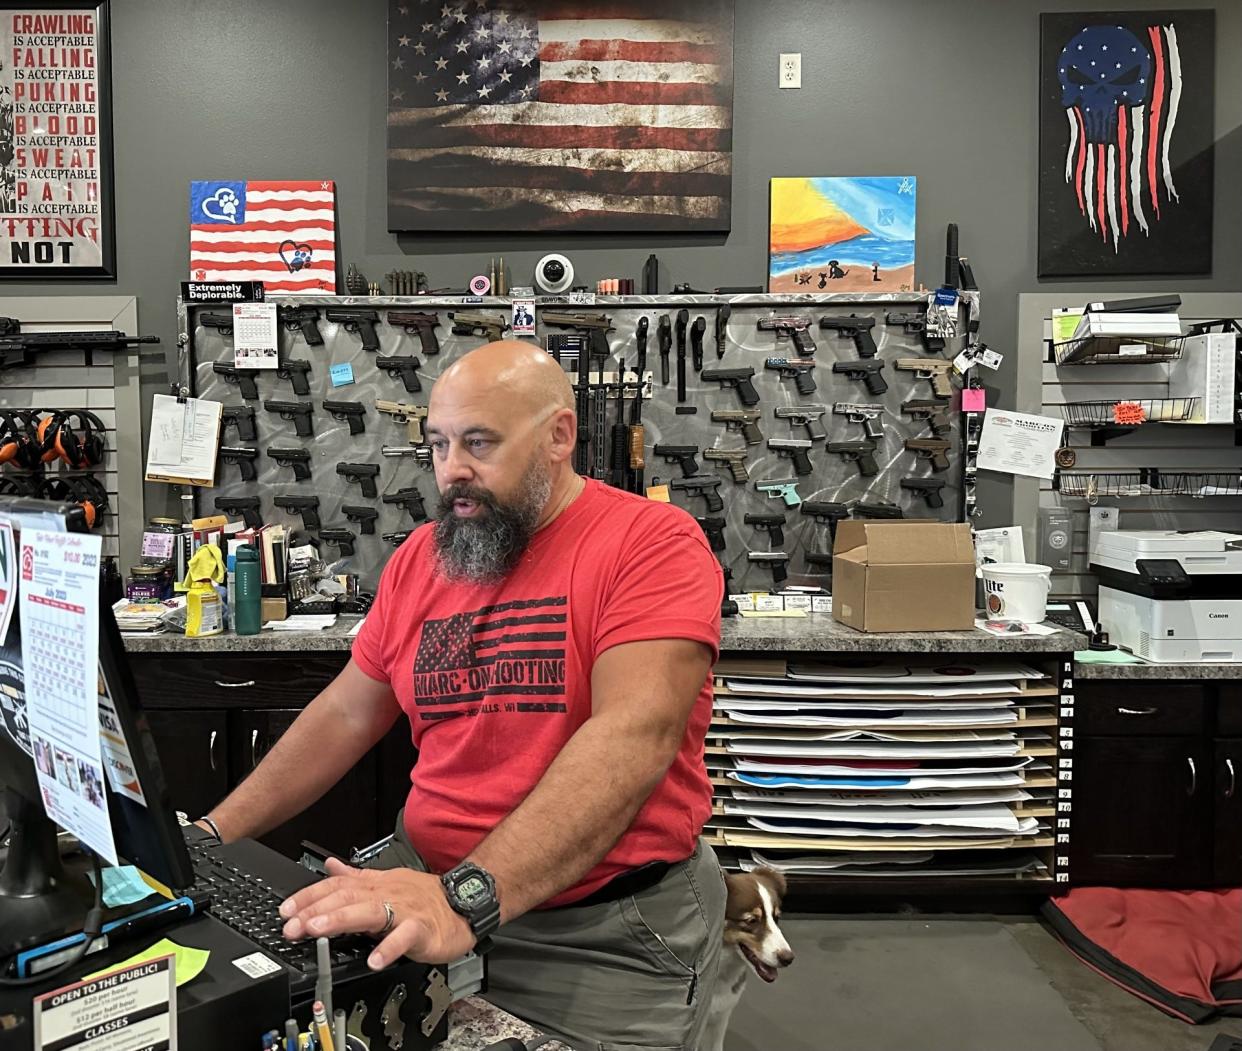 Dan Marcon, owner of Marc-On Shooting in Chippewa Falls, says he has made suicide prevention a priority by training his staff to watch for signs, offering to store guns for people in crisis and sharing the story of how he nearly took his own life.